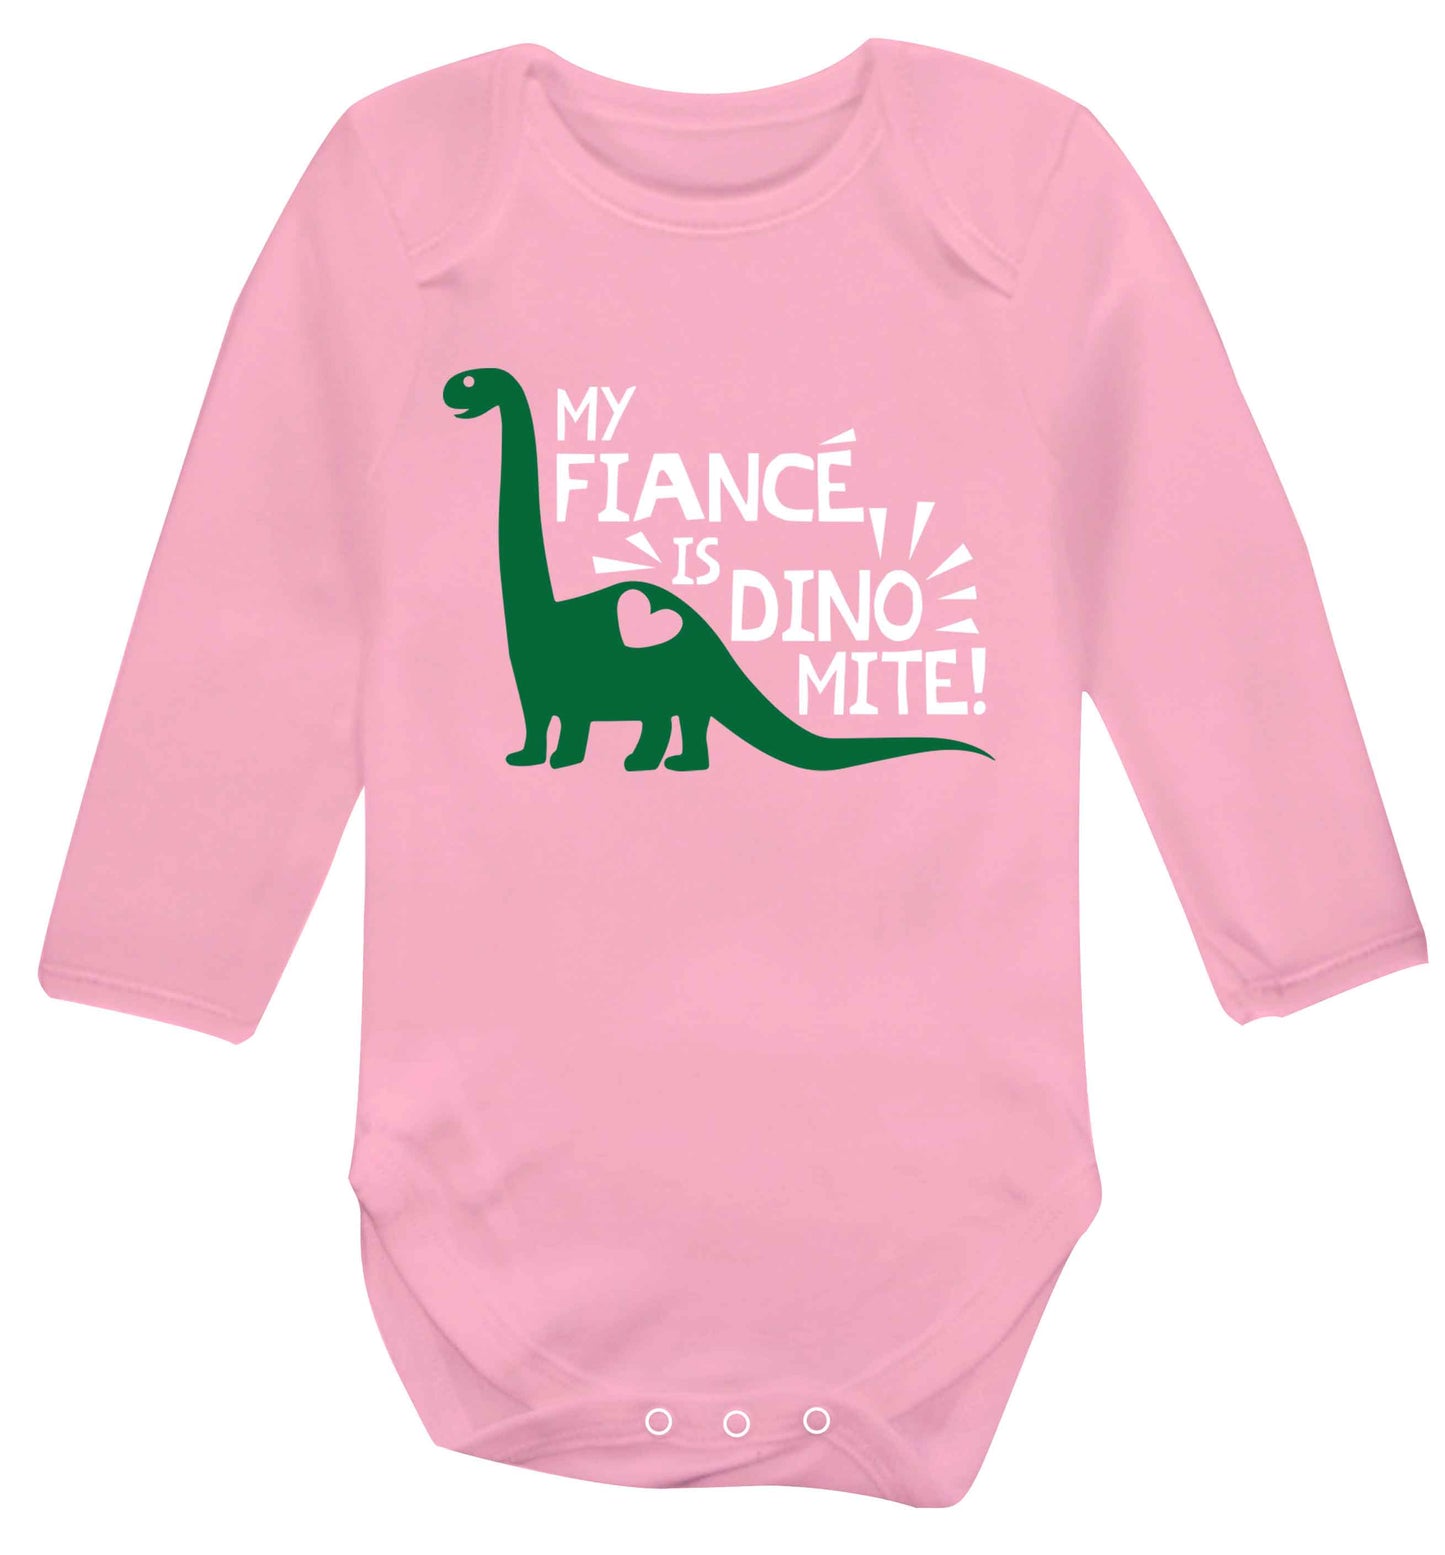 My fiance is dinomite! Baby Vest long sleeved pale pink 6-12 months